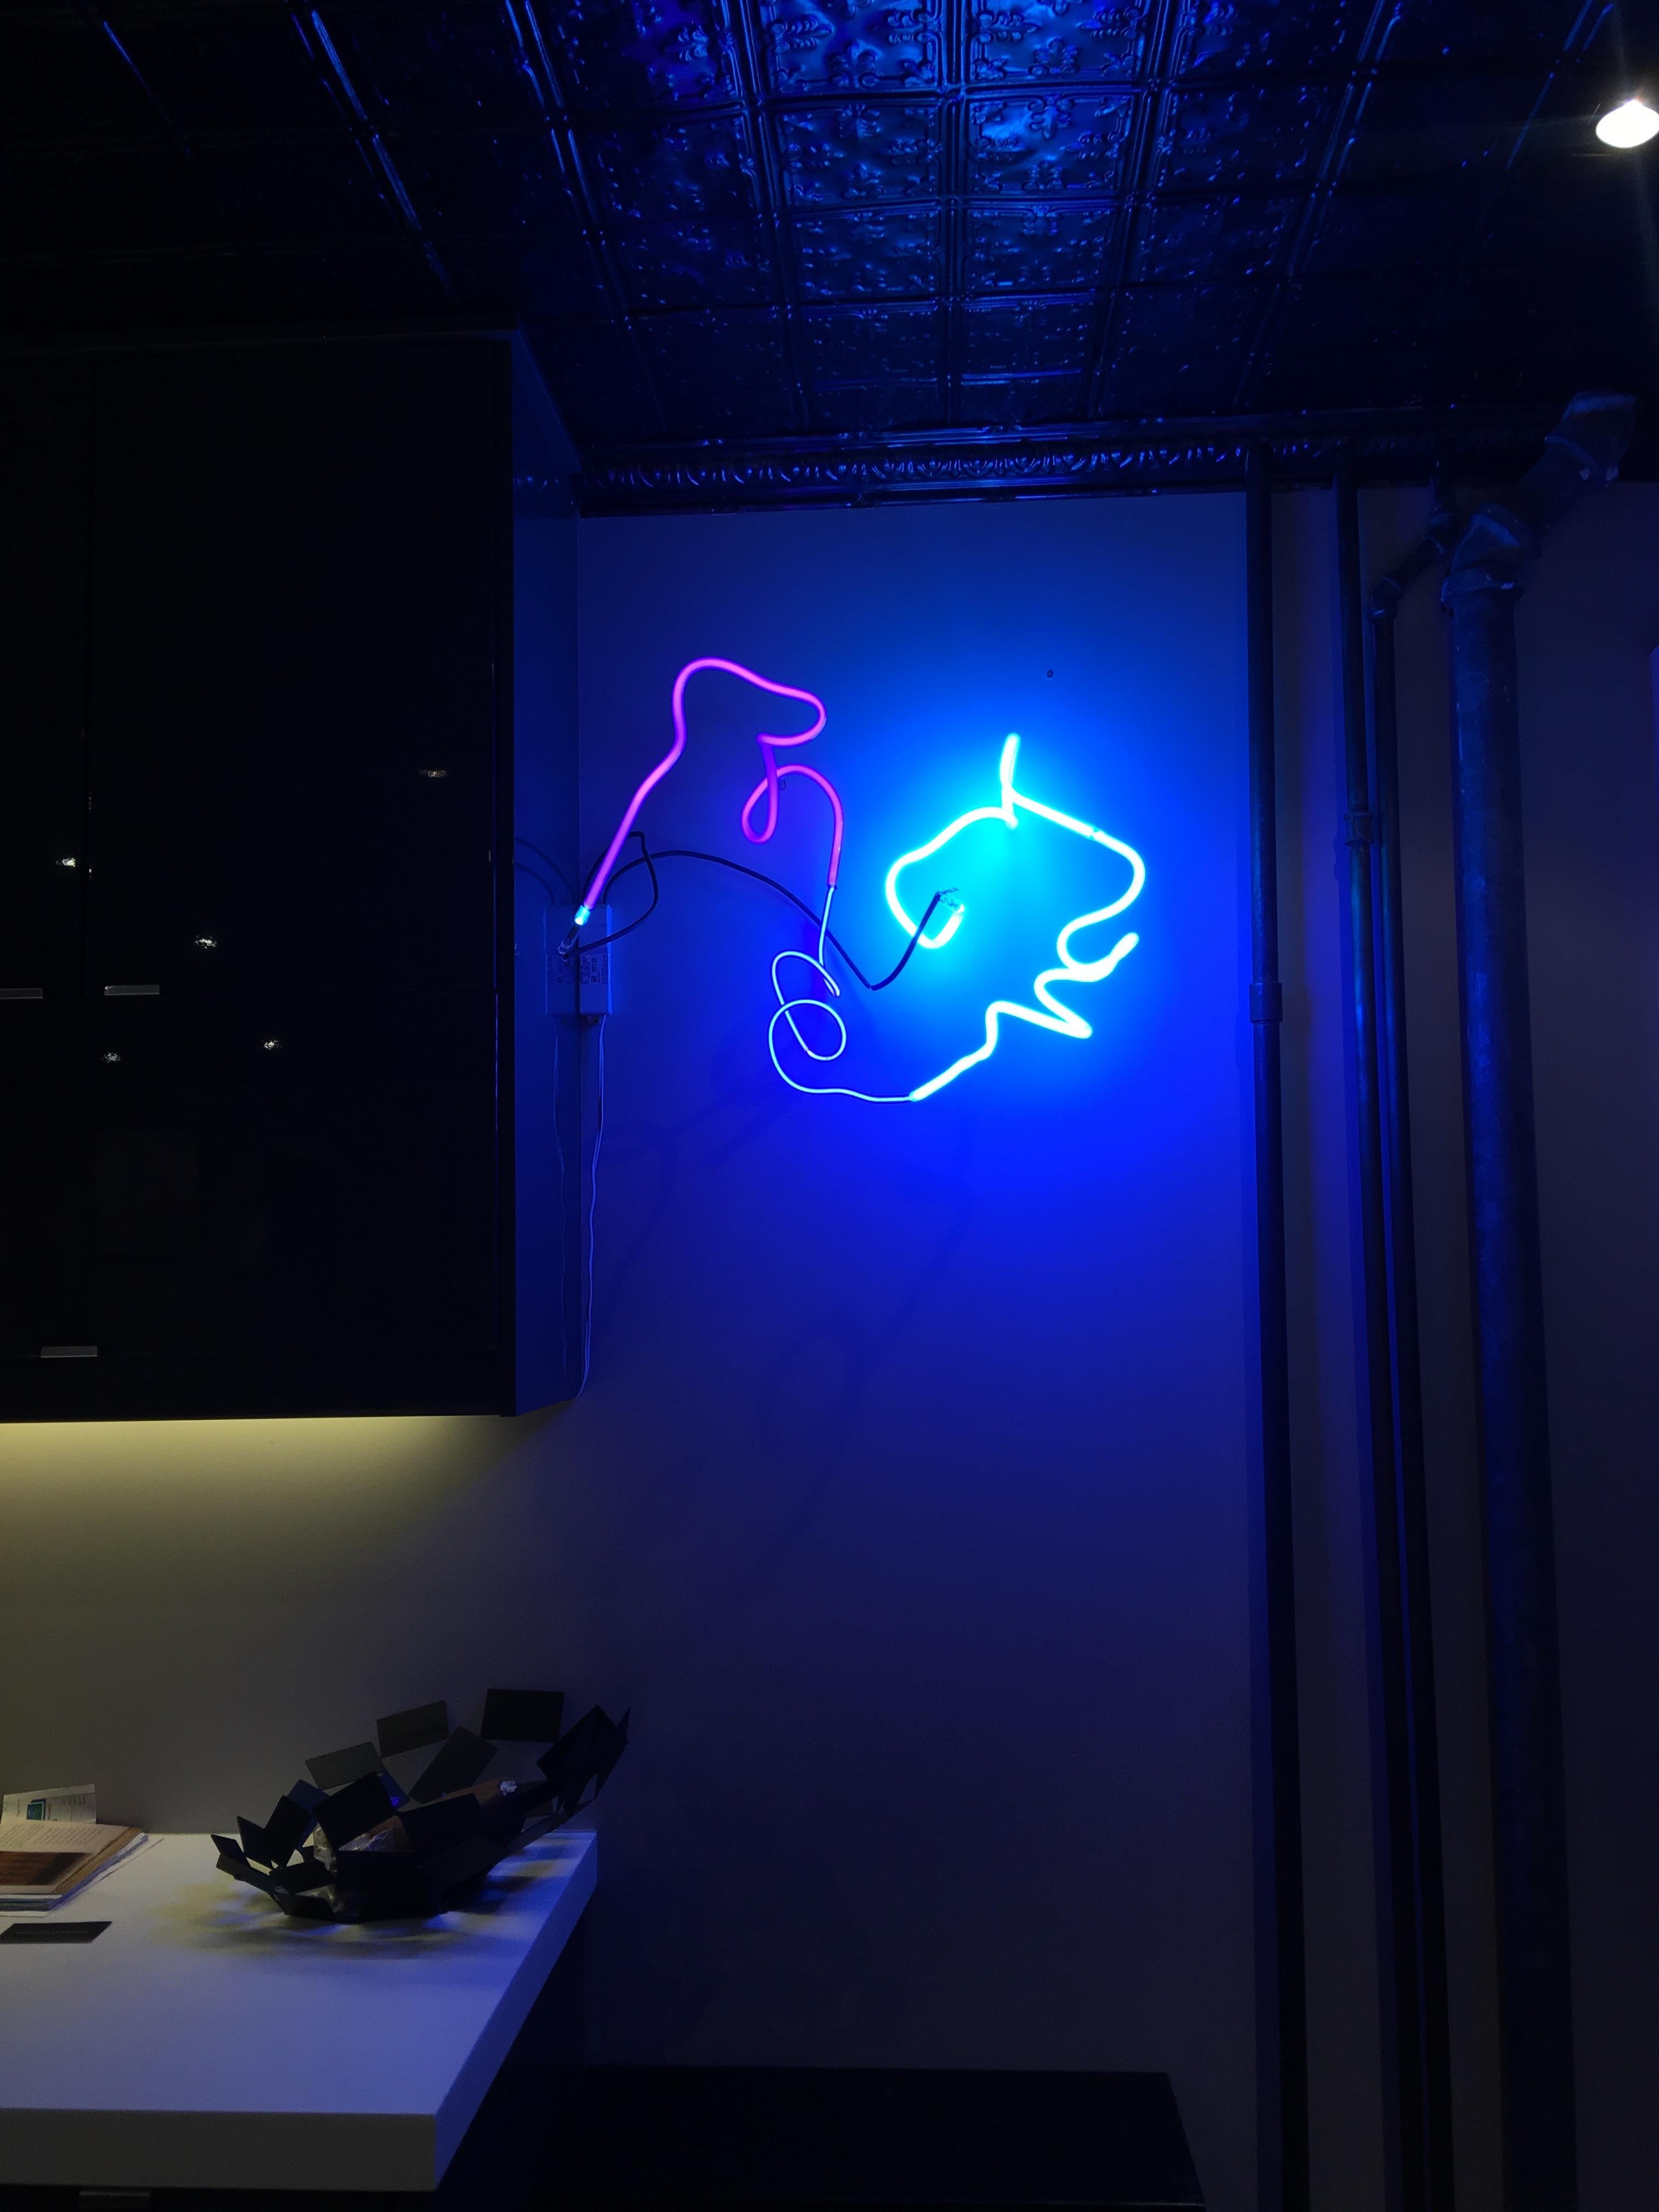 This solid hot pink neon light sculpture in an abstract form allows the viewer to see different things, reminiscent of picking out shapes in the clouds. Each neon sculpture is a one-of-a-kind, handmade in Brooklyn. We will deliver and install any